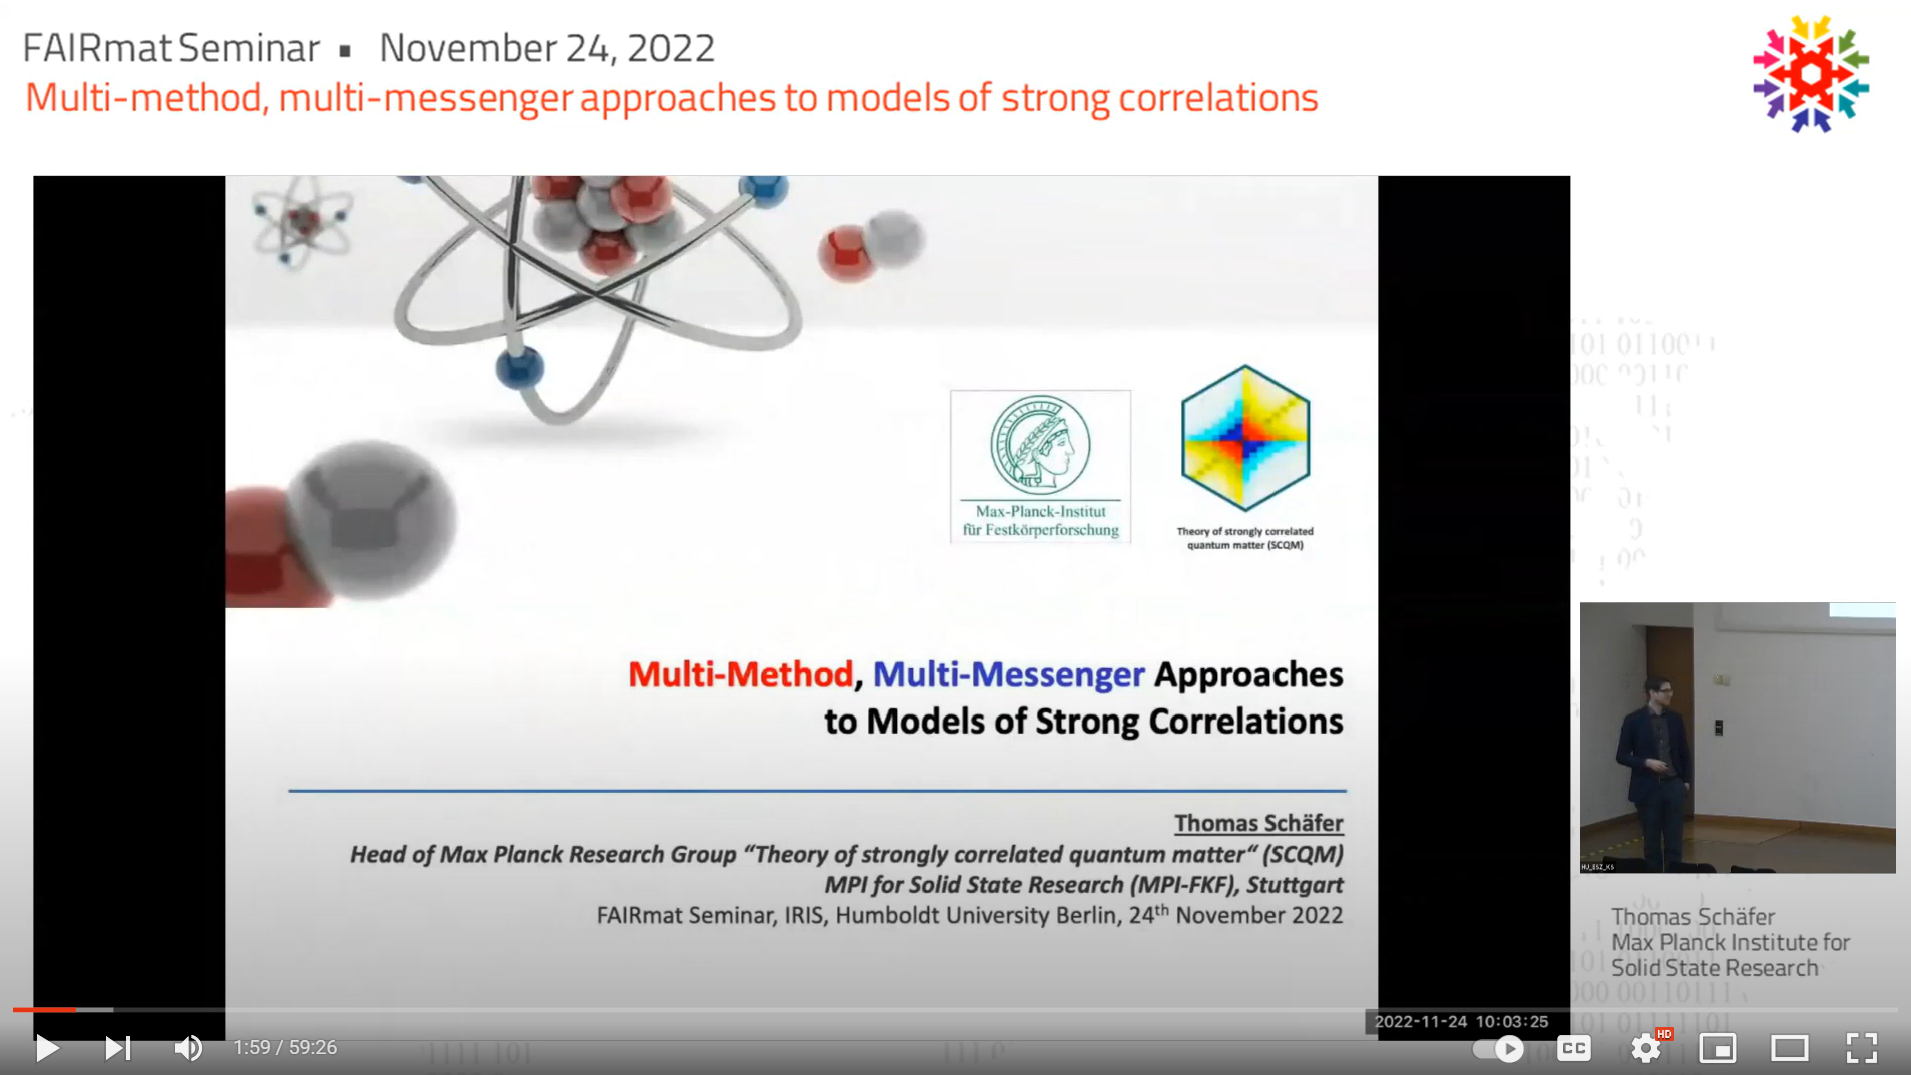 Multi-method, multi-messenger approaches to models of strong correlations